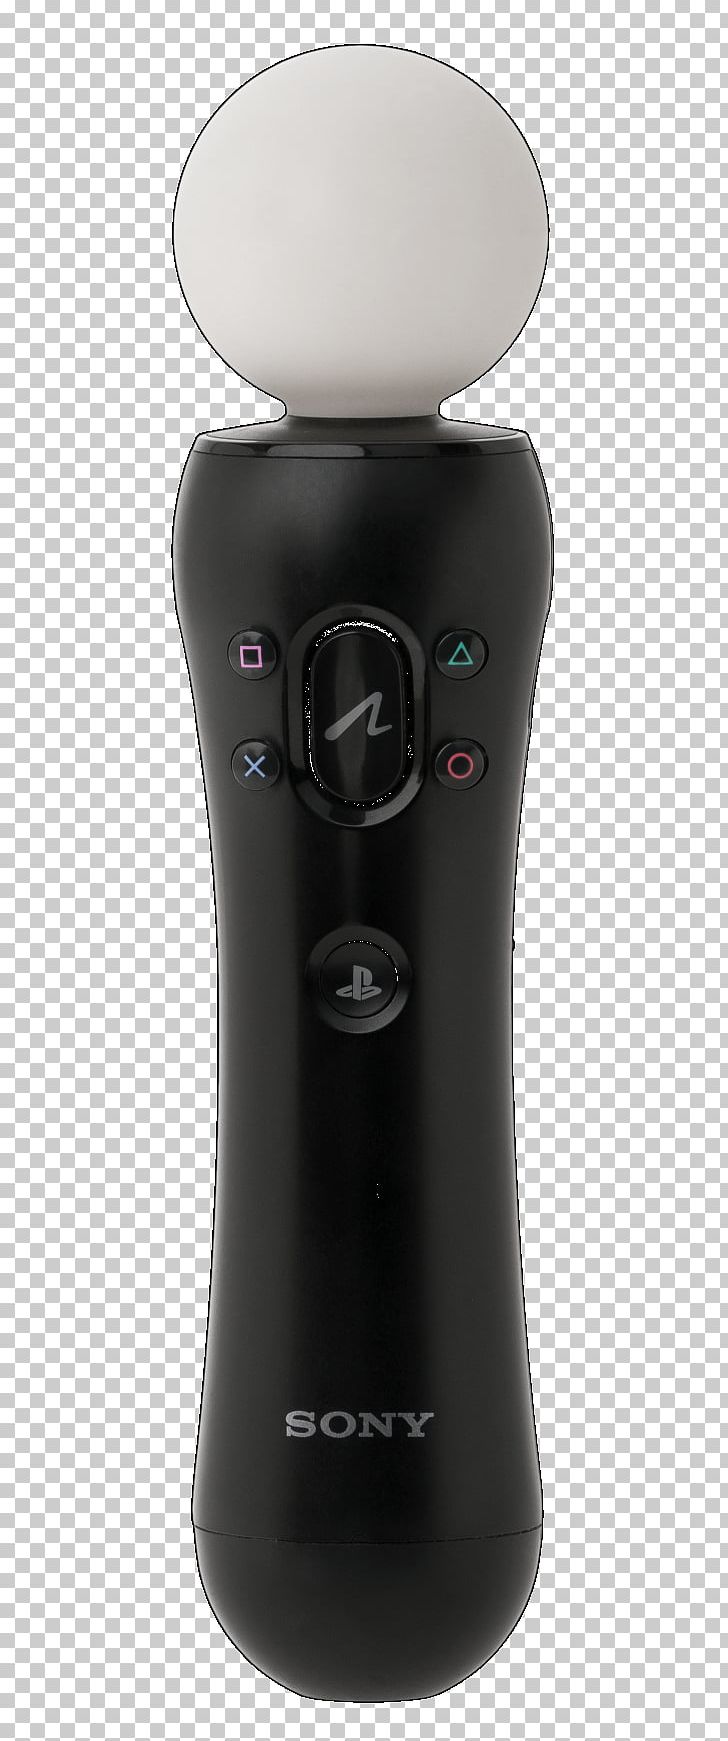 PlayStation VR Wii PlayStation 3 PlayStation 4 PNG, Clipart, Controller, Game, Game Controllers, Gamepad, Motion Controller Free PNG Download